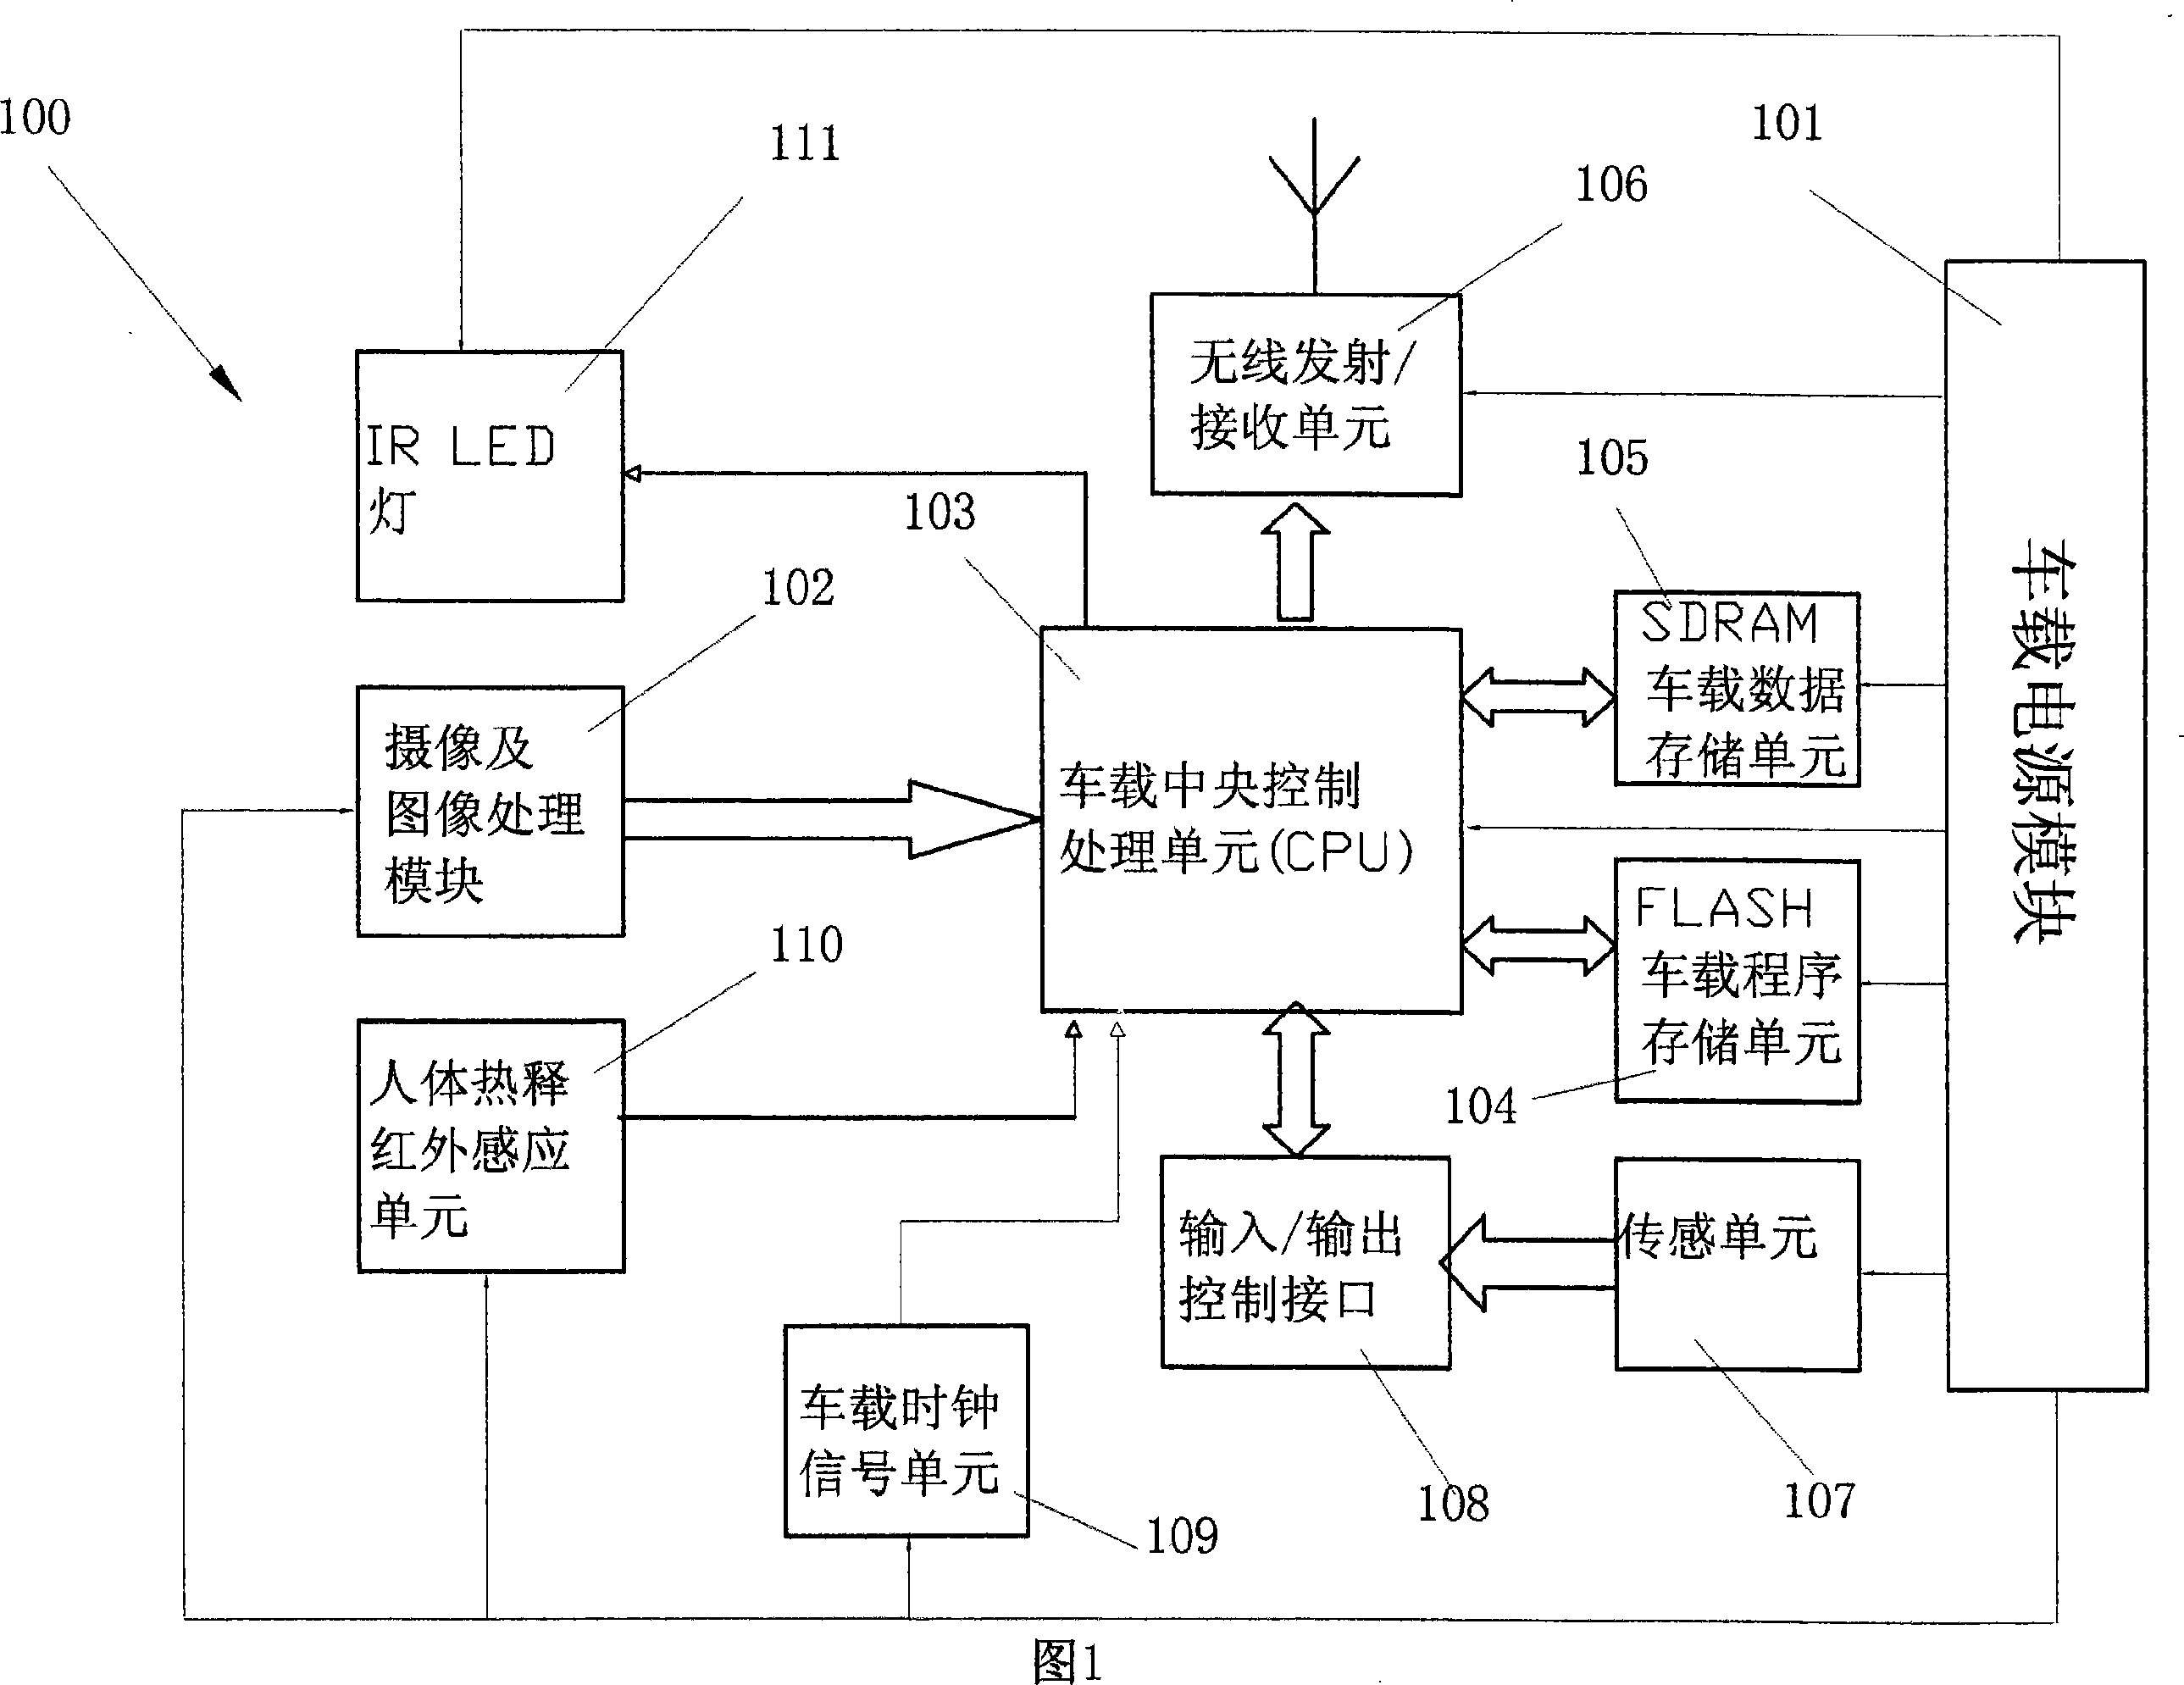 Method for active or passive examining parked car condition and its anti-theft alarm system